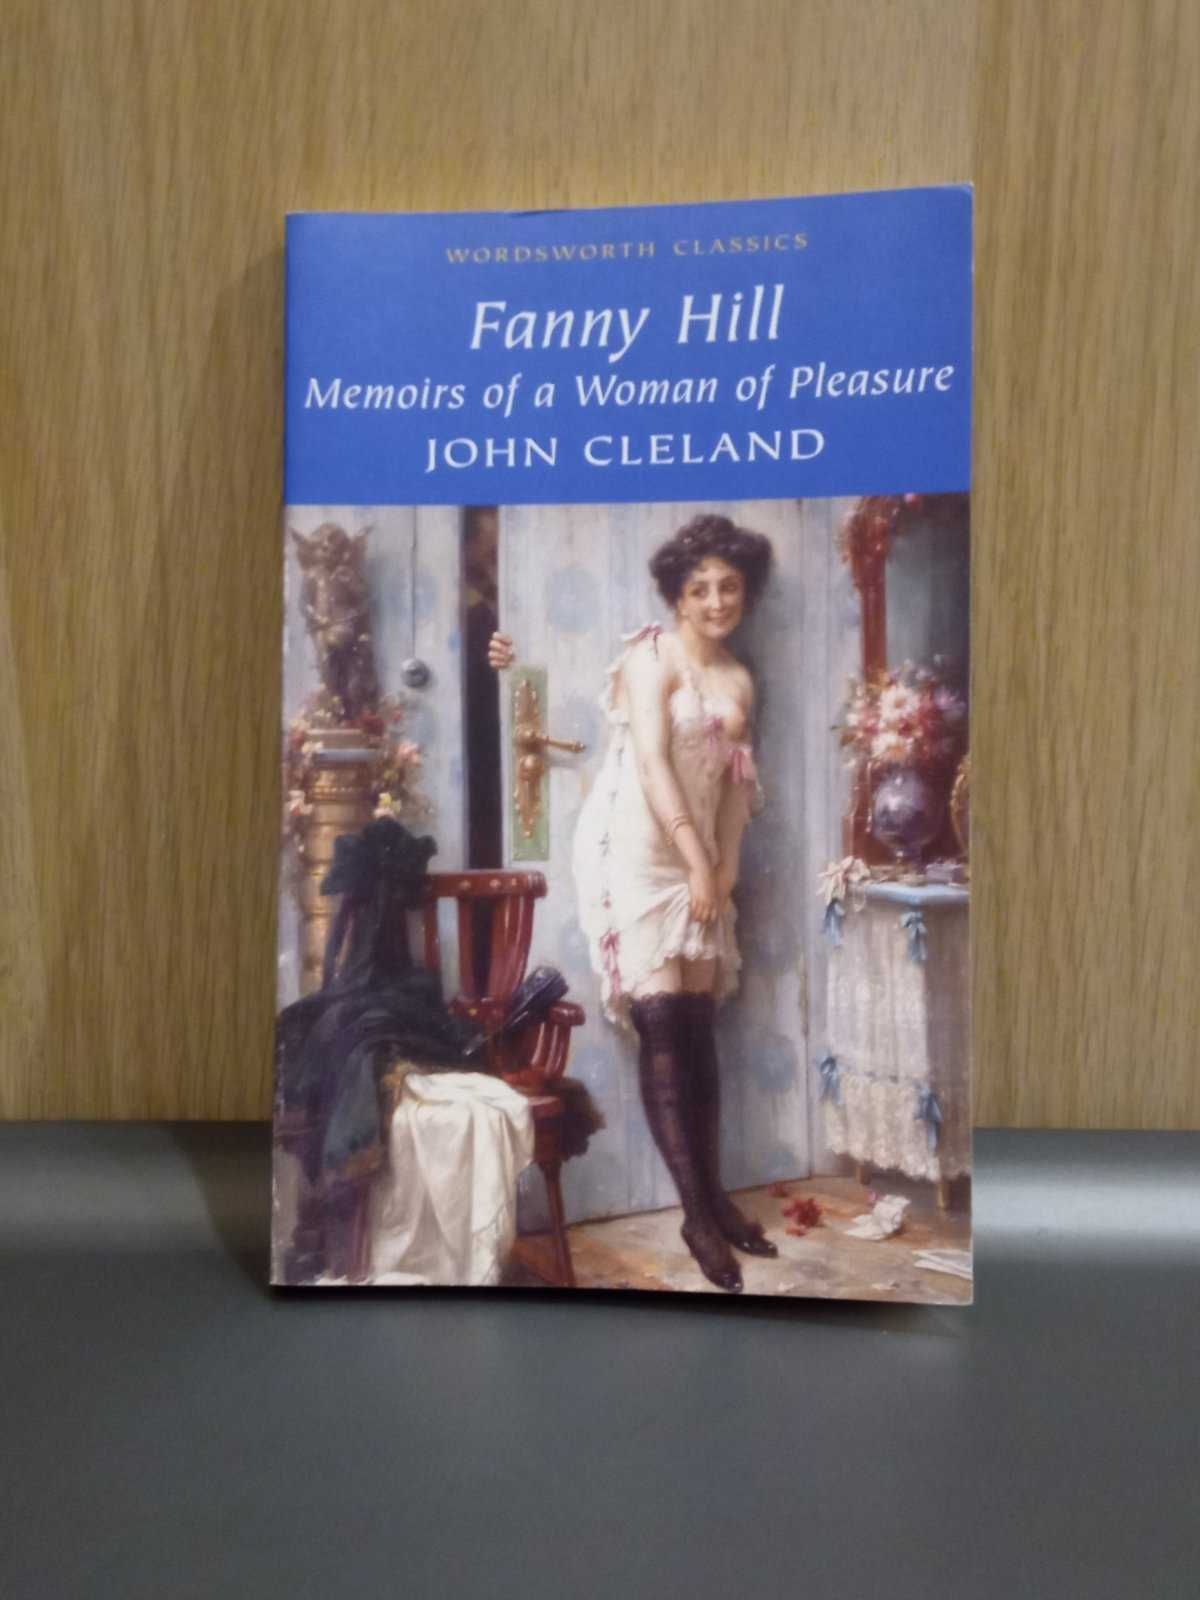 Fanny hill Memoirs of a woman of pleasure by John Cleland